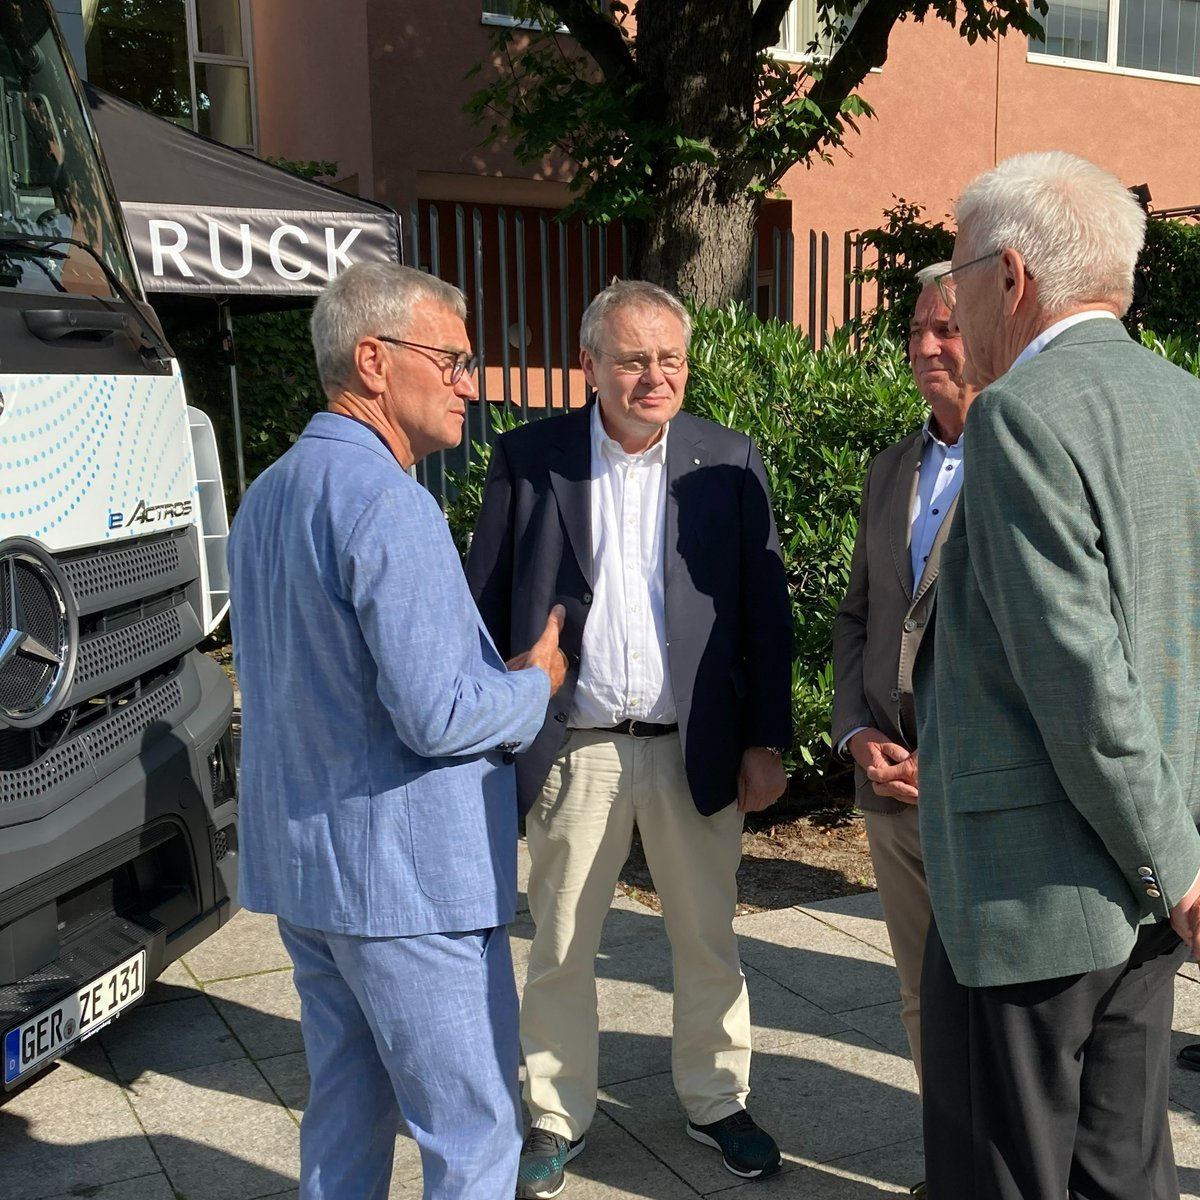 Our #eActros 300 Lowliner Concept at #Stallwaechterparty @LVBWBerlin, which #WinfriedKretschmann, MP of @thelaend & #ThomasStrobl, Minister of the Interior, Digitalisation & Local Government & State Secretary #RudiHoogvliet took a closer look at, together with @Joerg_Howe. 🚛🔋